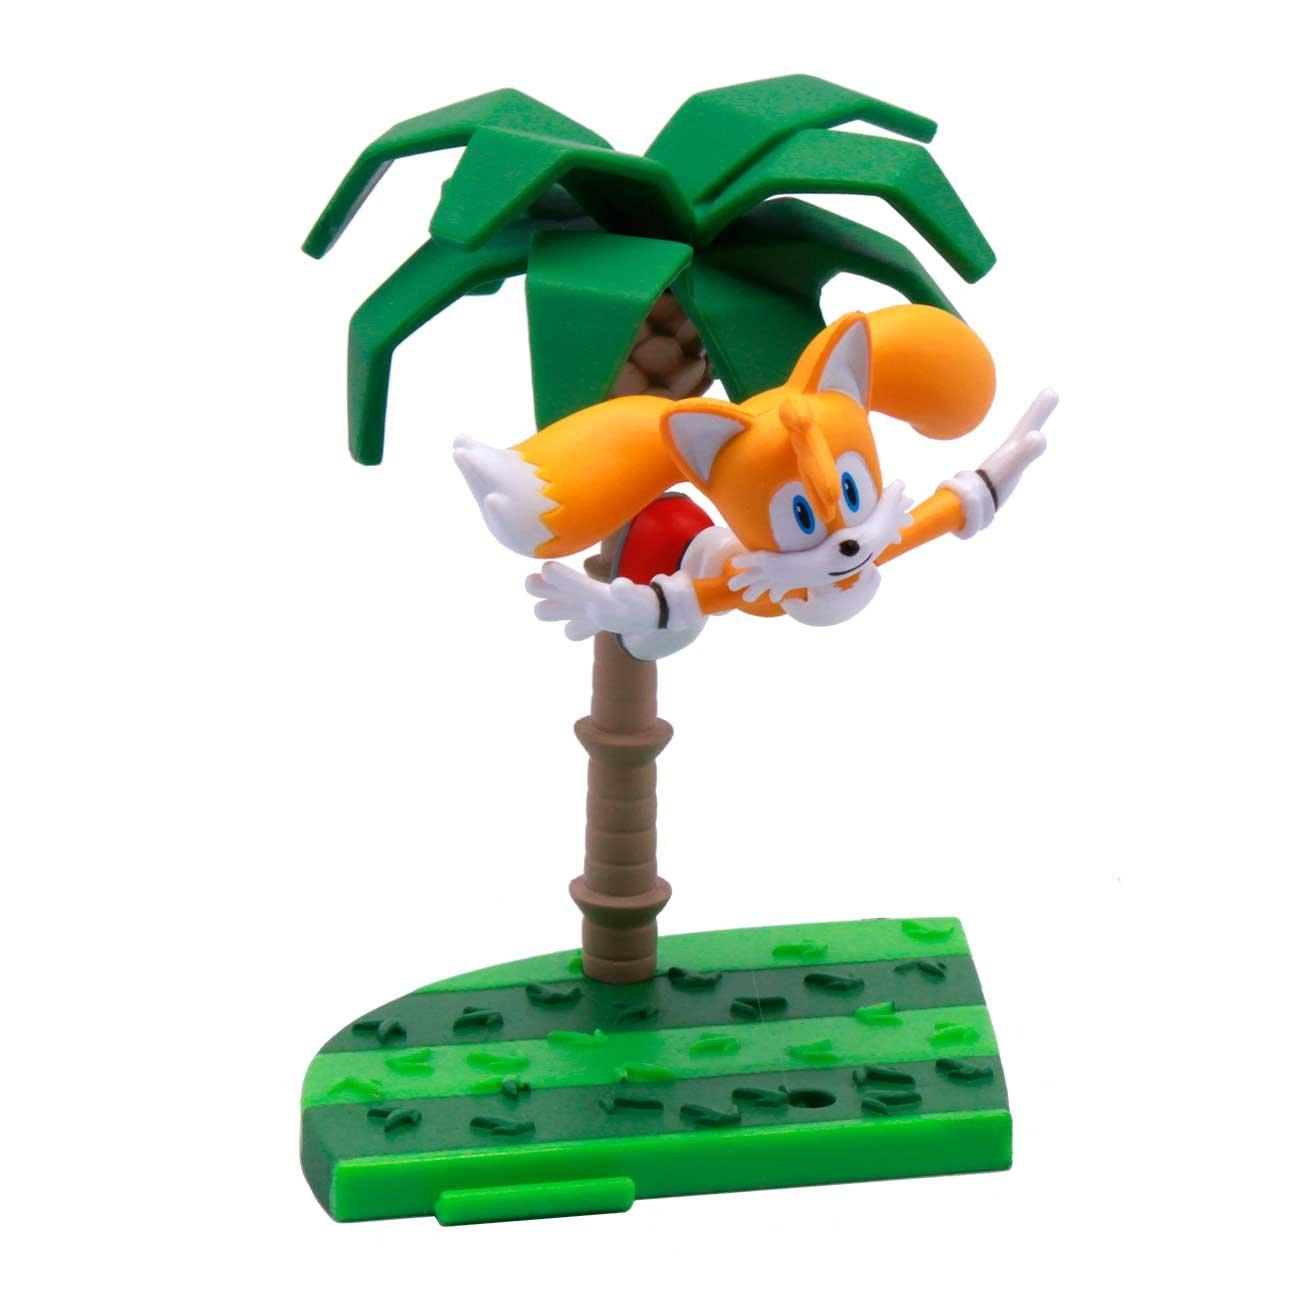 Just Toys Sonic the Hedgehog Craftable Buildable Action Figure - Series 3 (Styles May Vary)